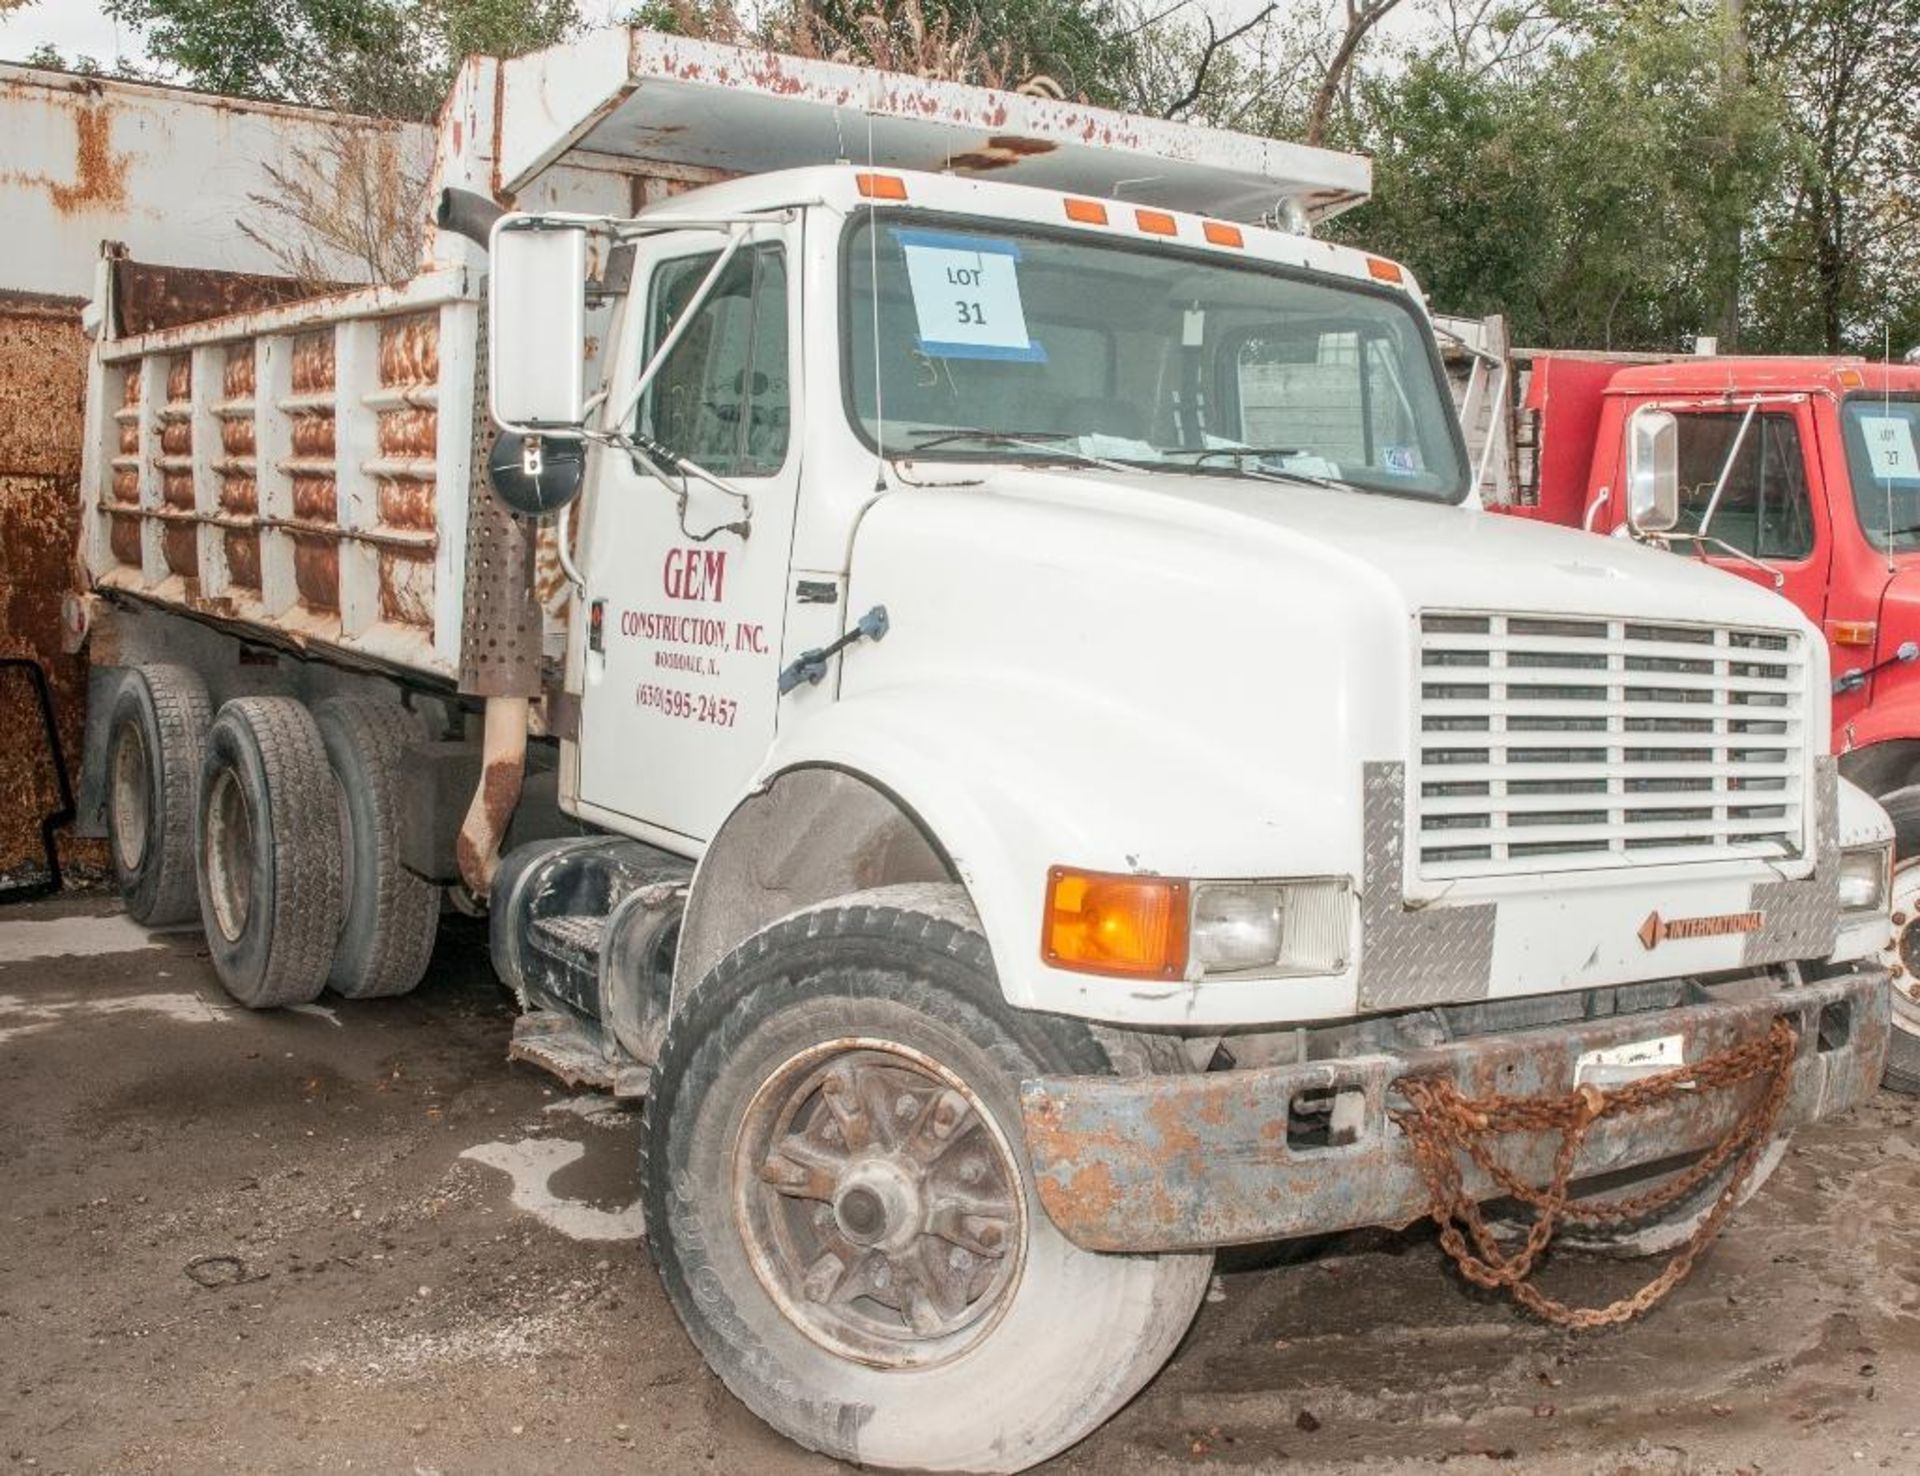 1990 International Model 4900 6x4 Conventional Cab and Chassis; VIN 1HTSHZ3T3LH660246; 17" Dump Body